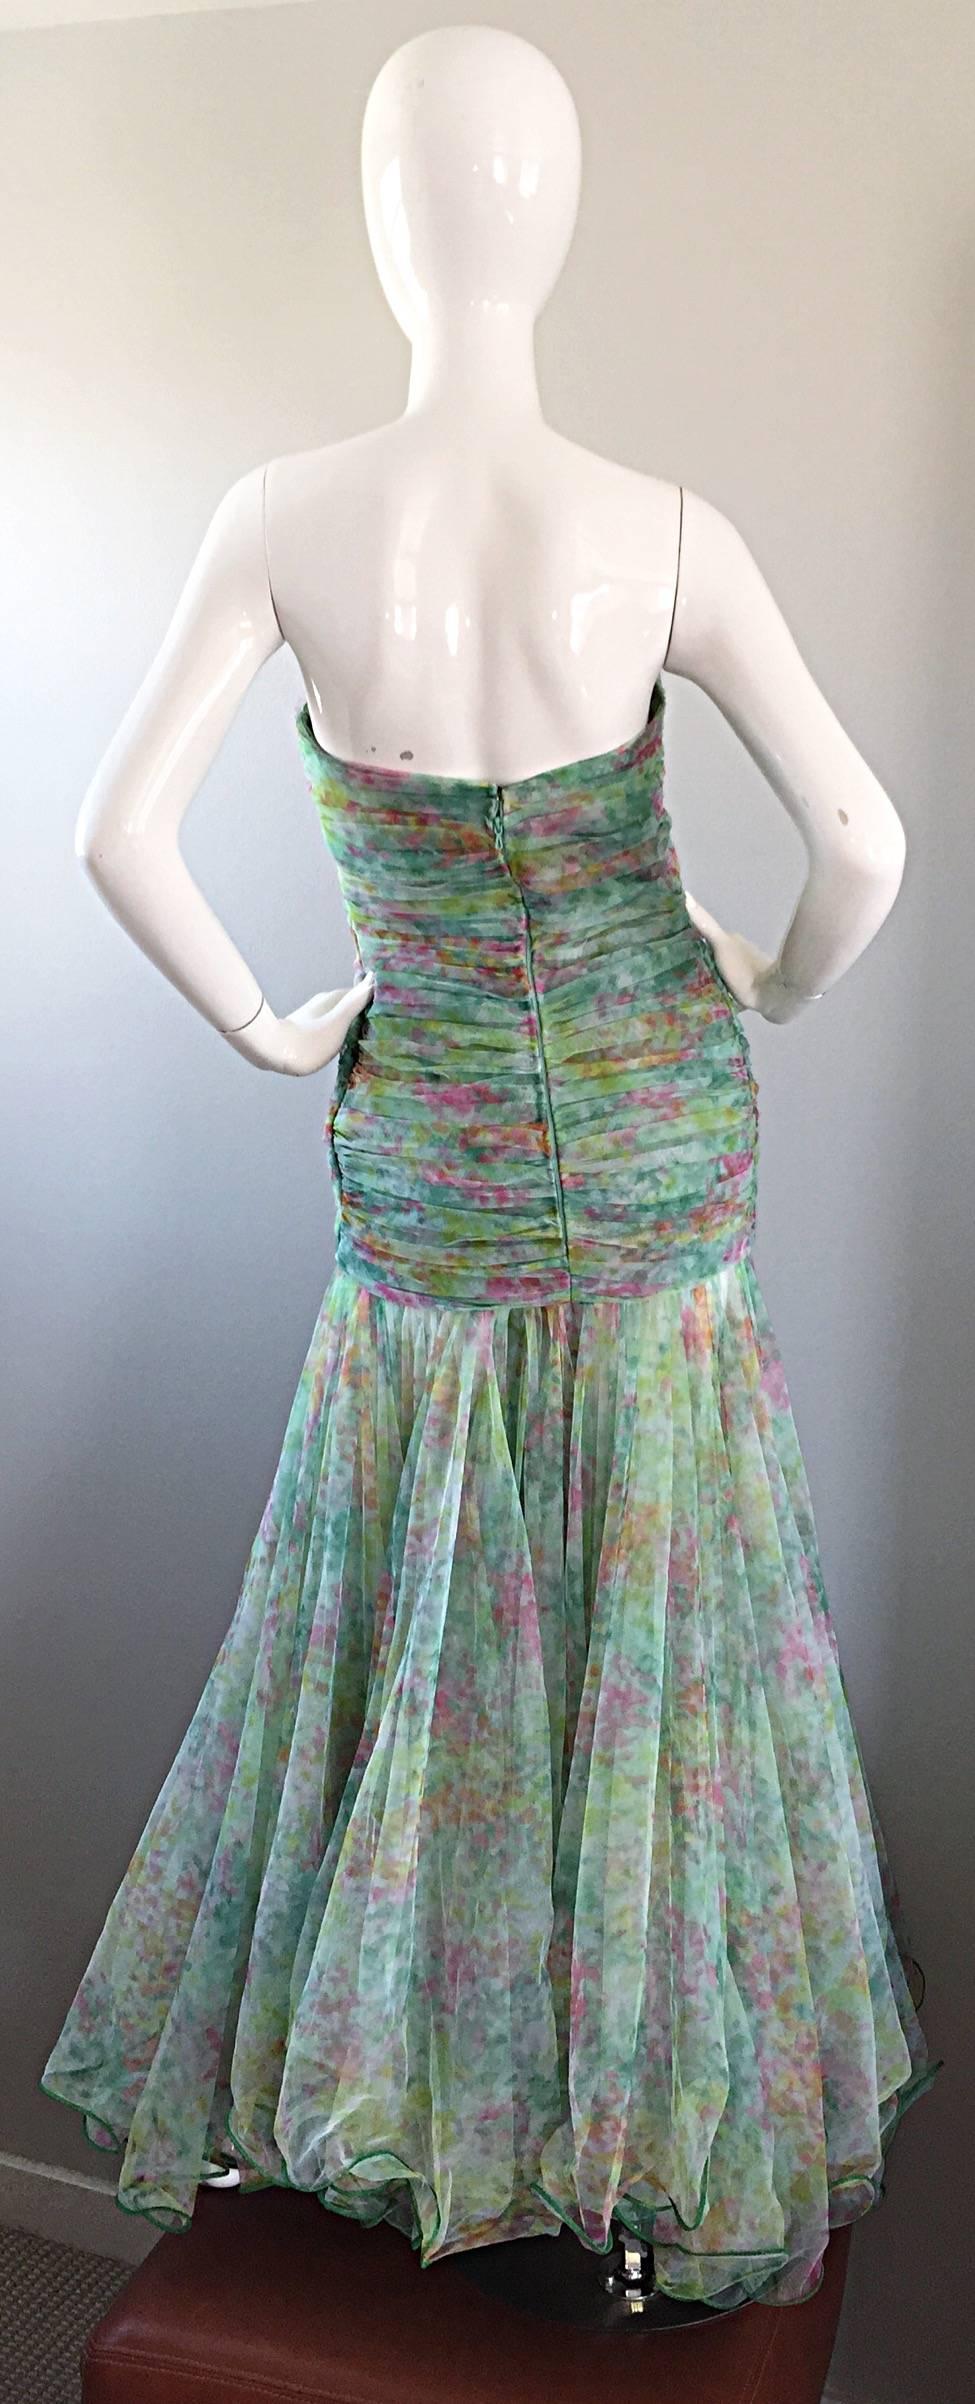 Women's Breathtaking Vintage Jean Jacques Bertrand Couture Strapless Watercolor Gown